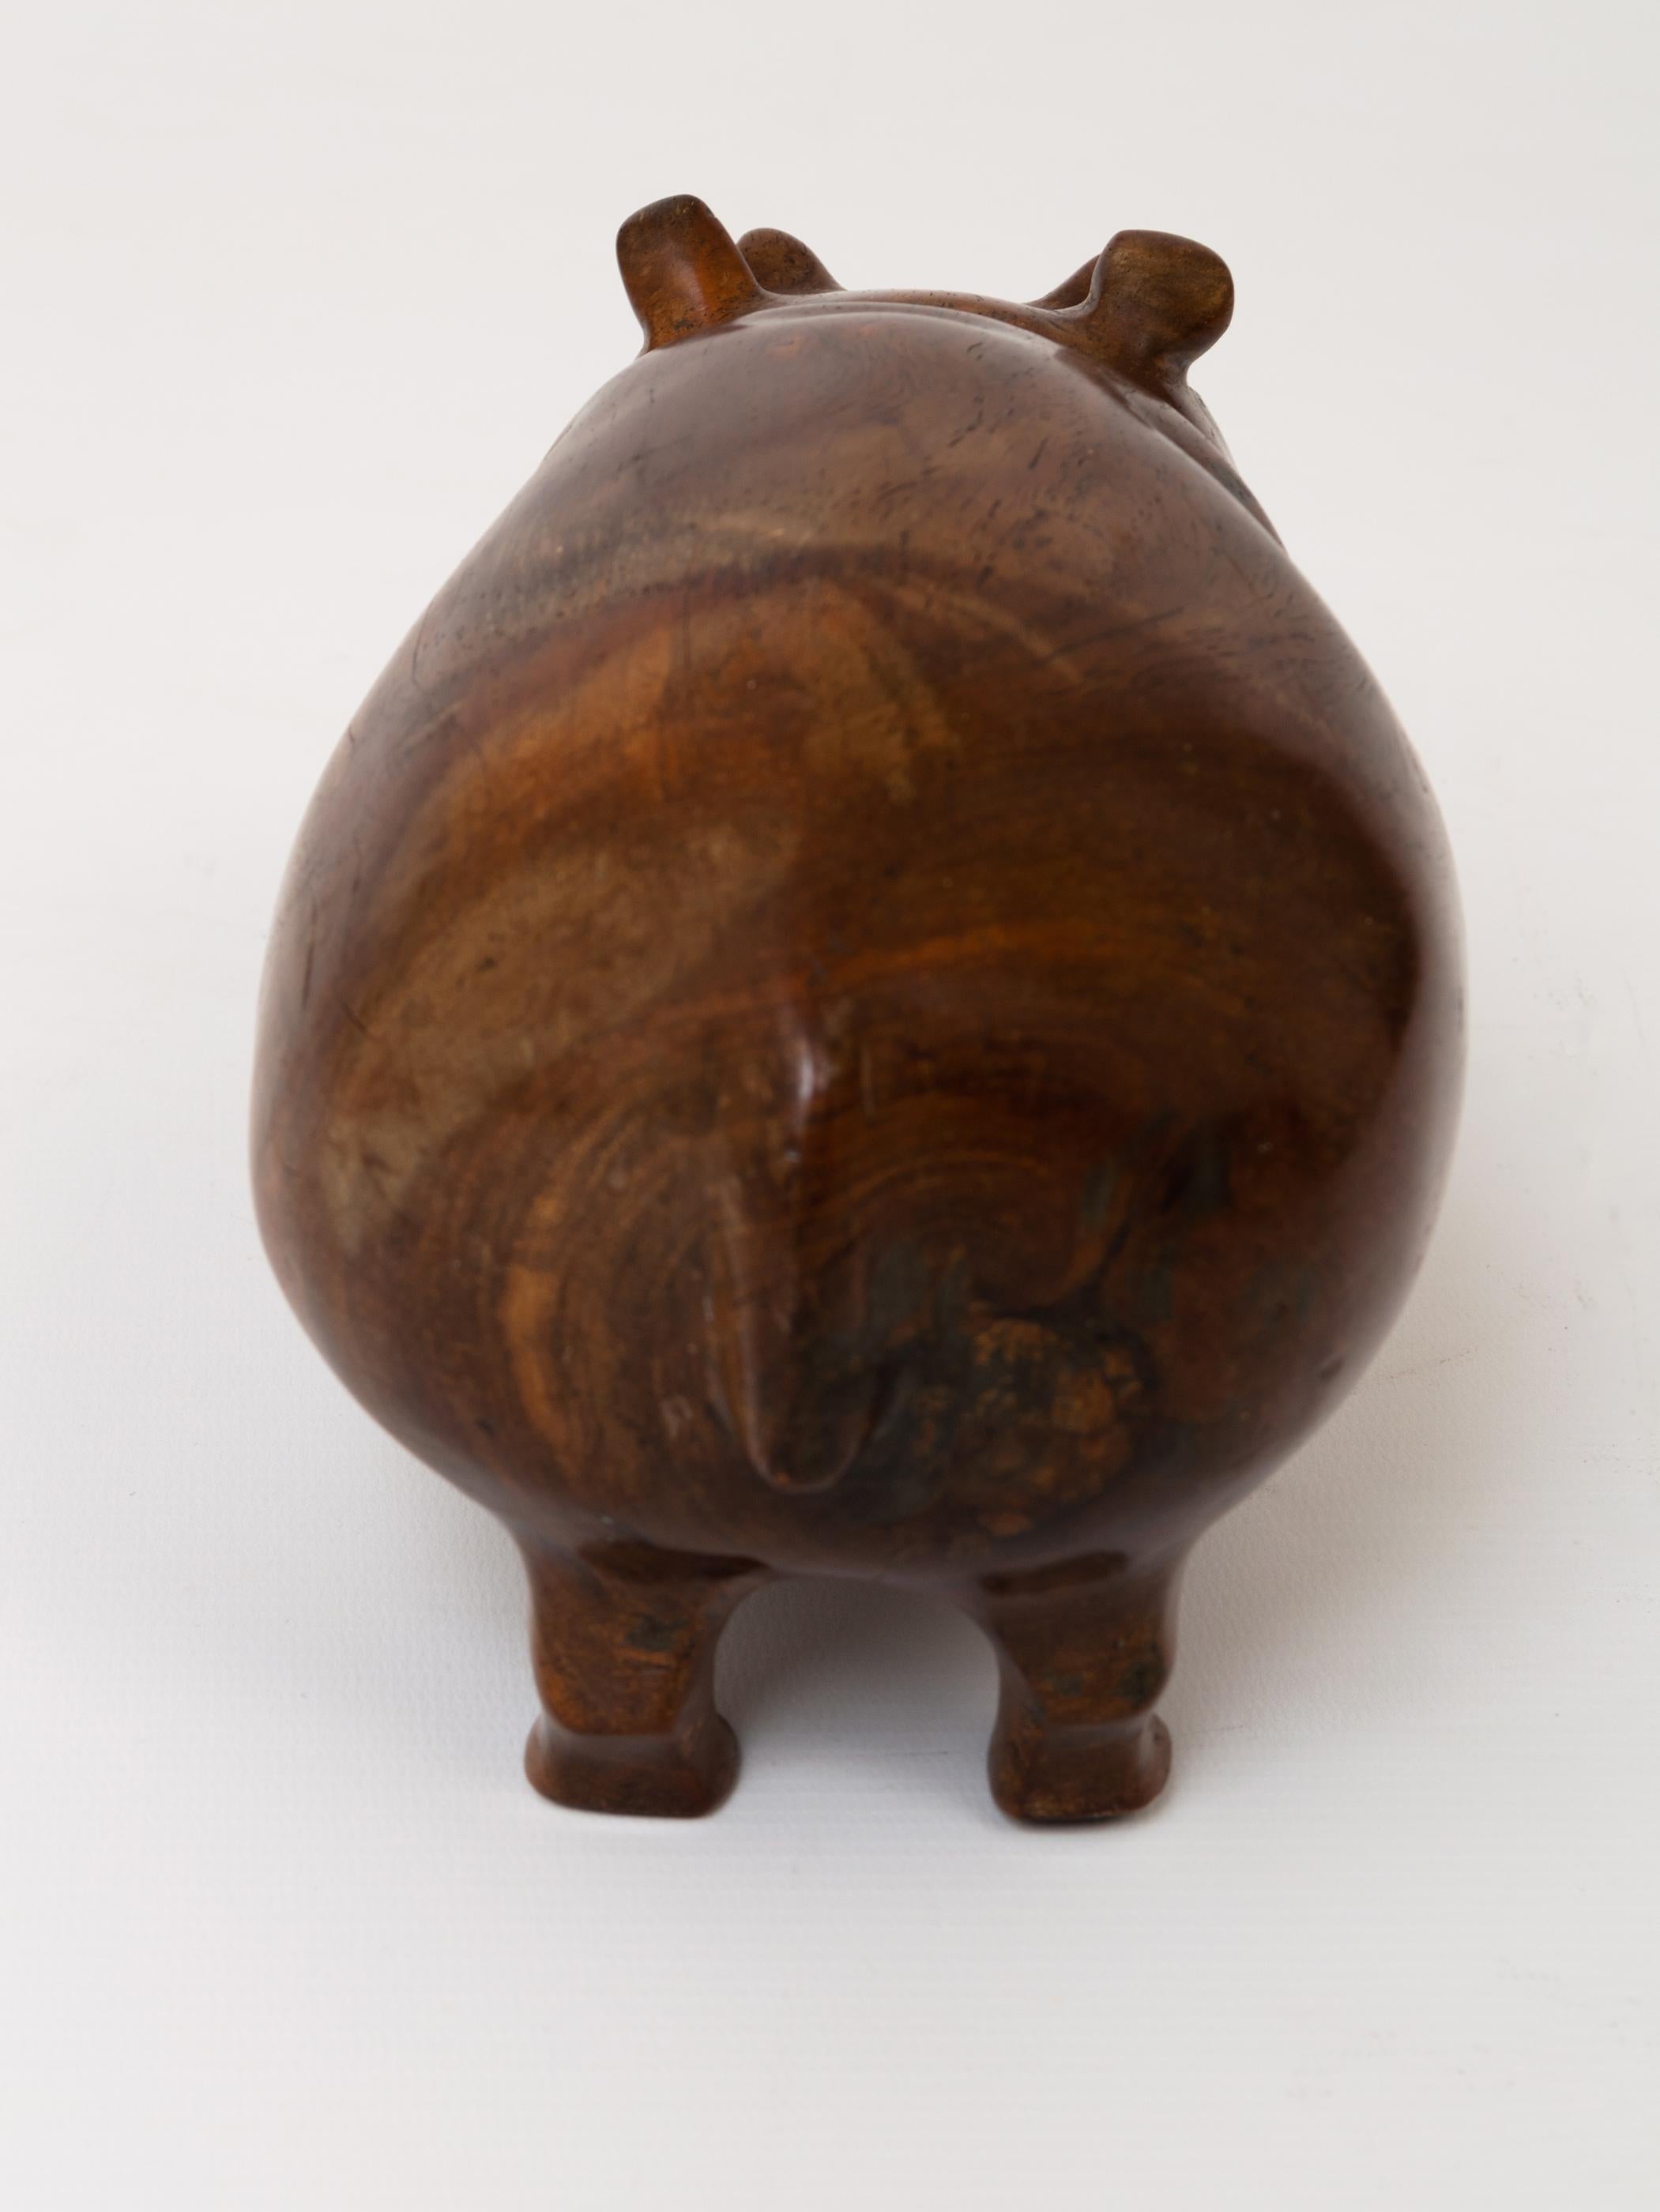 A particularly nice example of a solid teak carved Hippopotamus sculpture C.1960.
In excellent vintage condition commensurate of age.